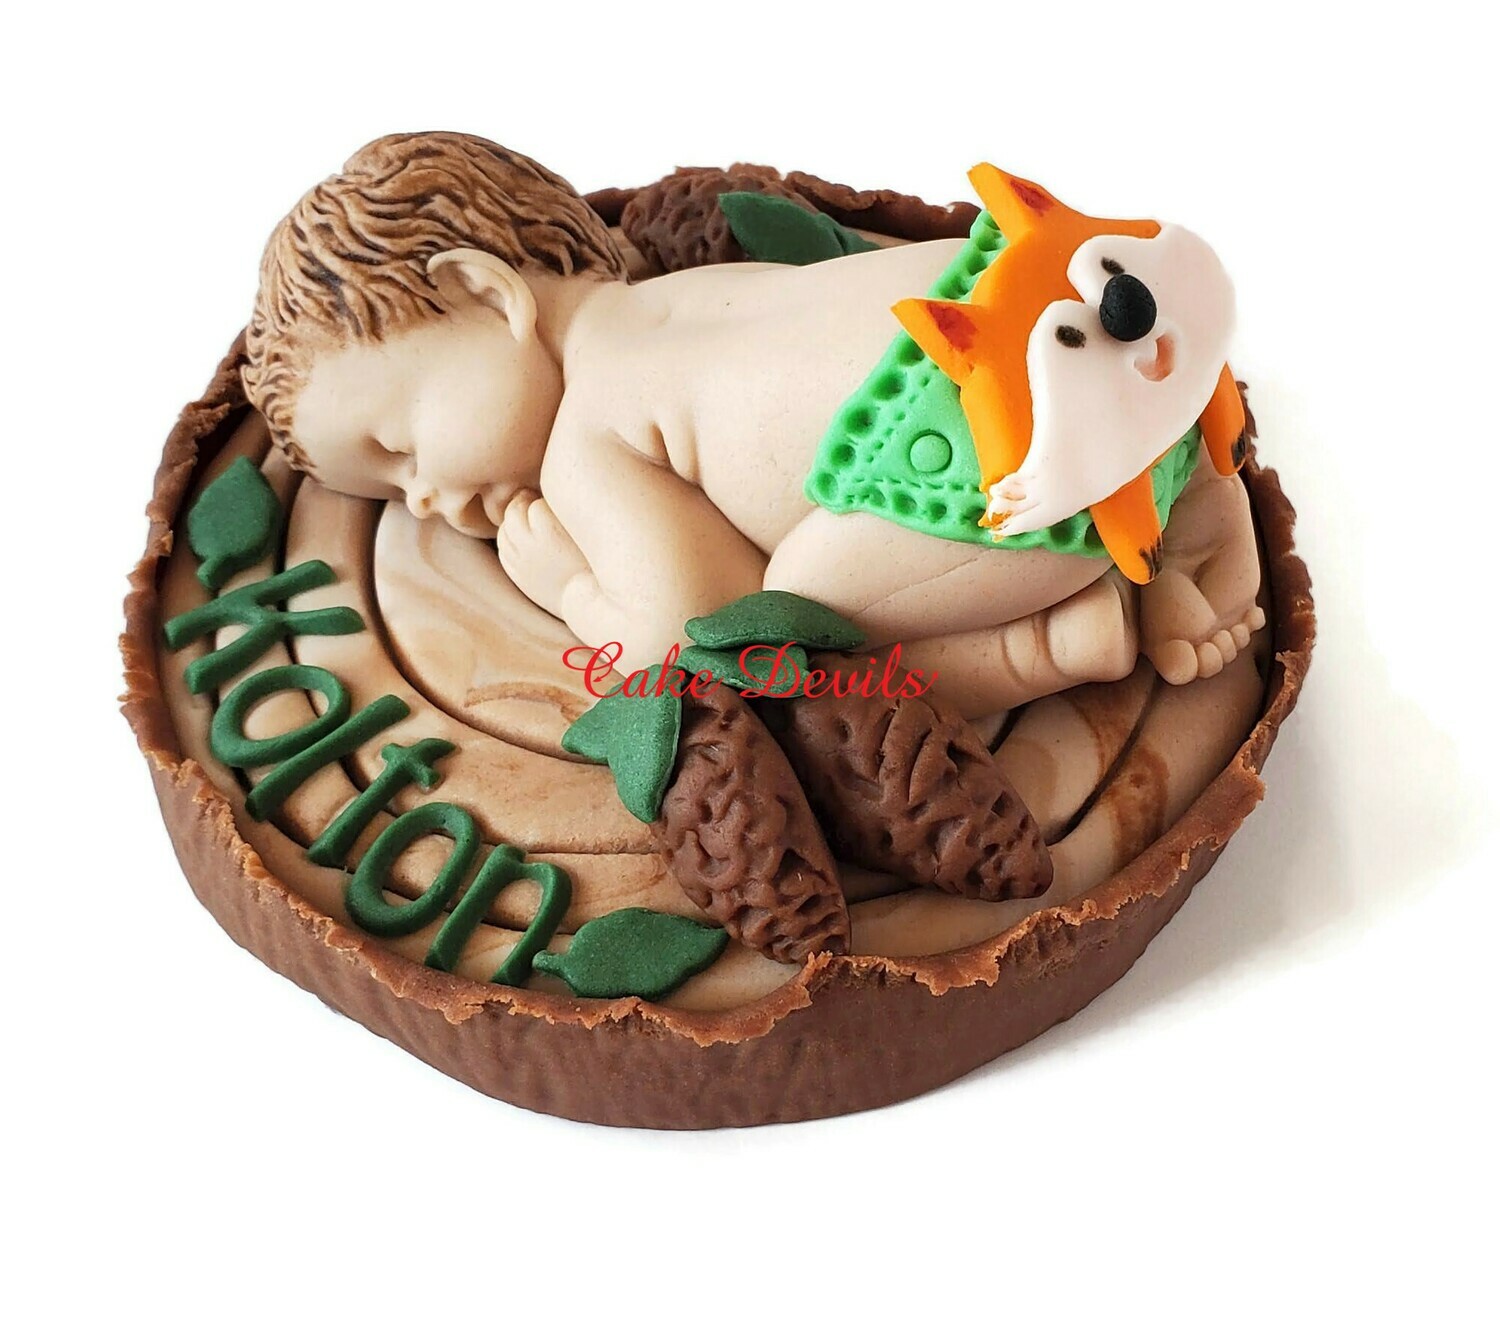 Fondant Baby with Fox on Diaper Baby Shower Cake Topper sleeping on a Tree Stump